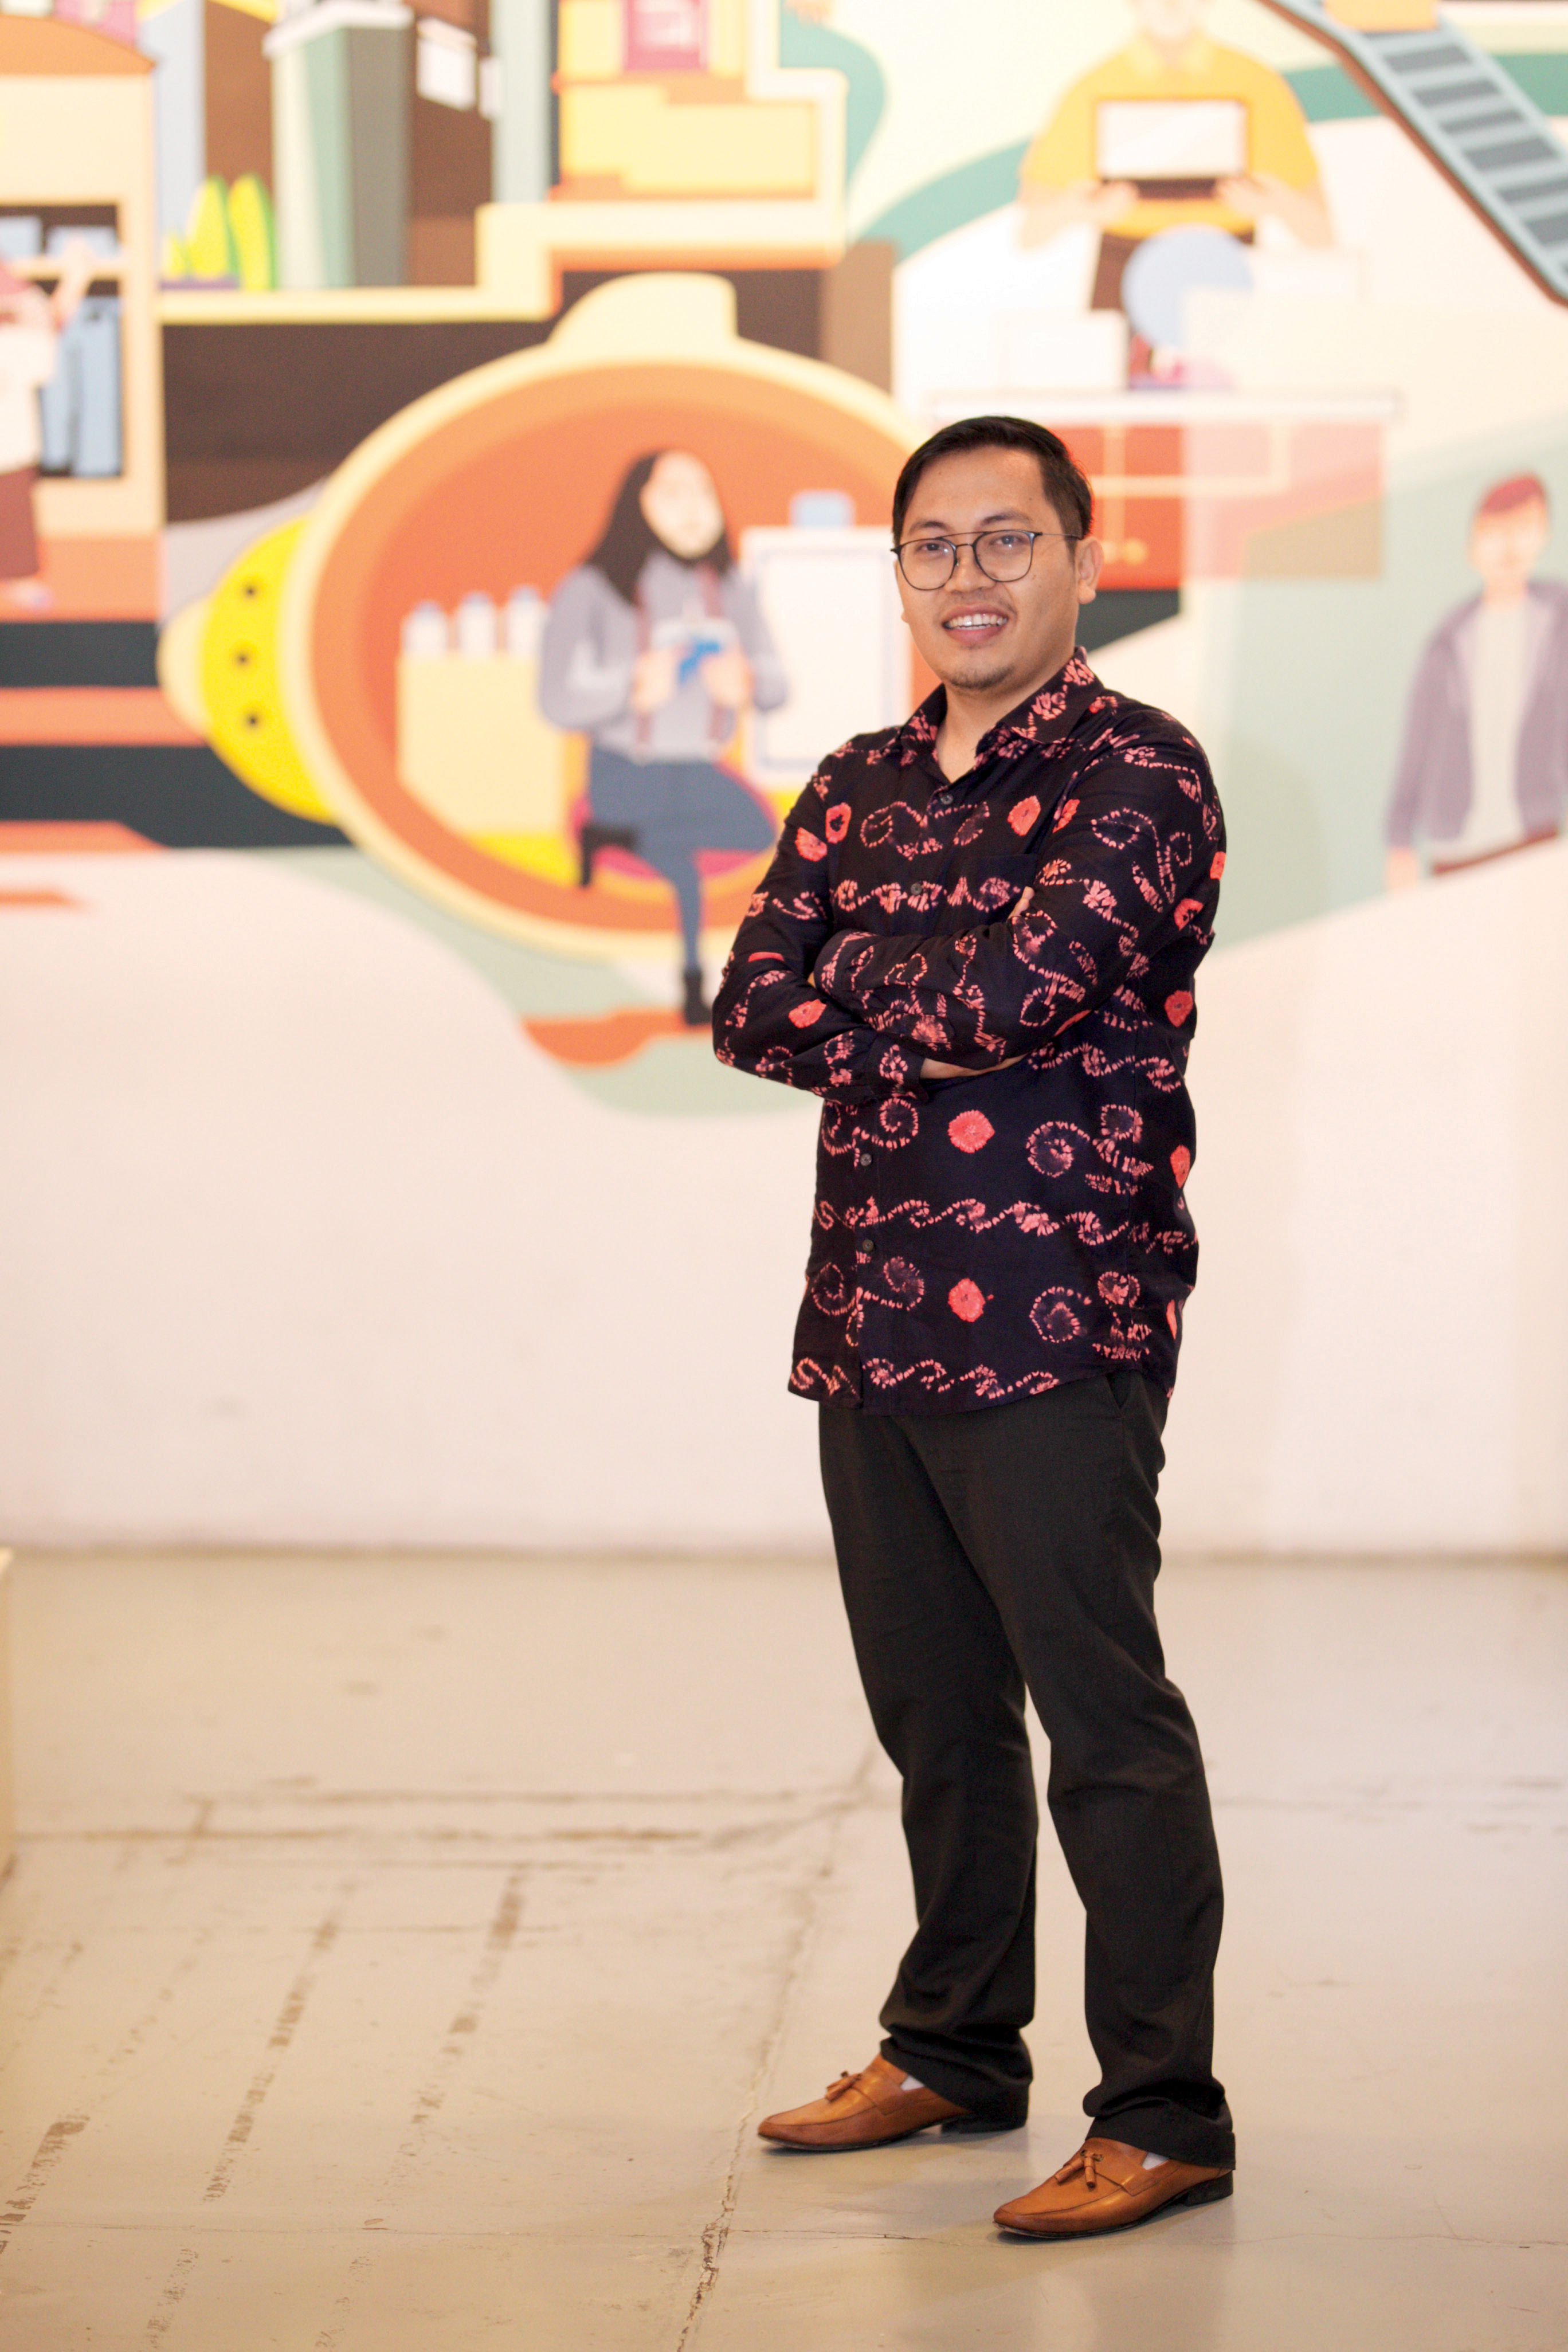 Achmad Zaky Founded Bukalapak to Improve Small Businesses